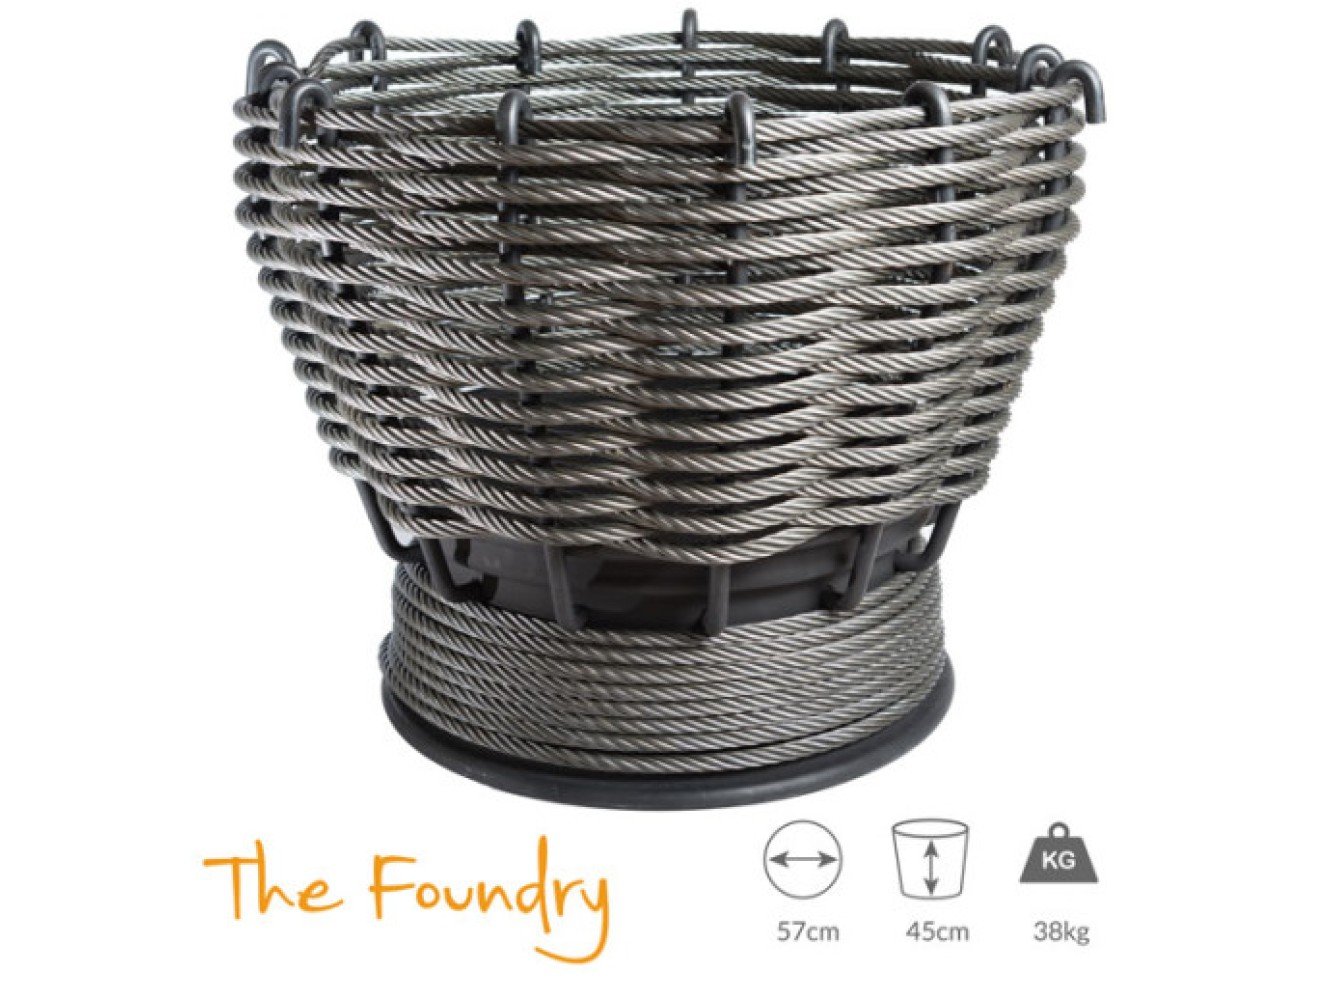 The Foundry Firepit